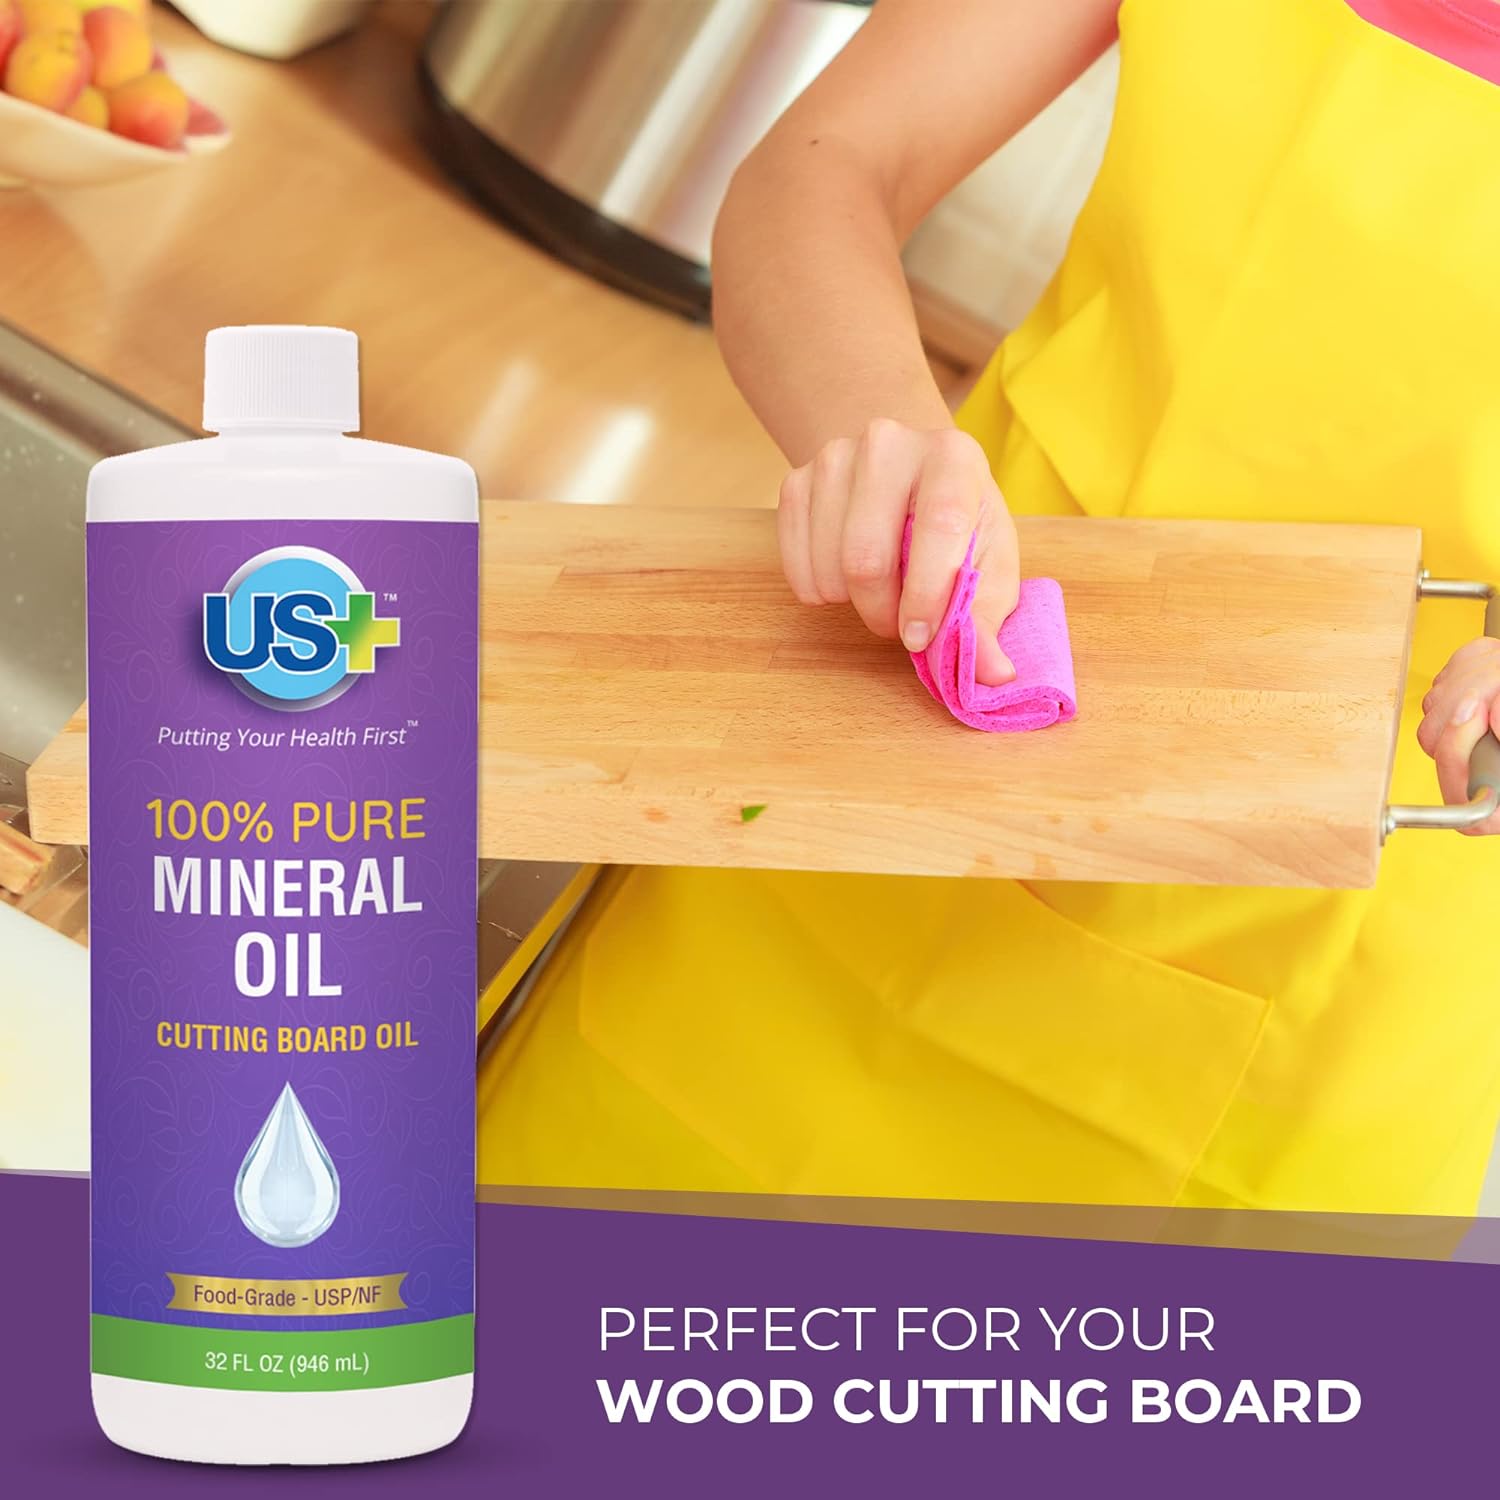 US+ 32oz 100% Pure Mineral Oil - Cutting Board Oil - Food-Grade - USP - Restores & Protects Cutting Boards, Butcher Blocks, Countertops, Steel Surfaces & More : Health & Household